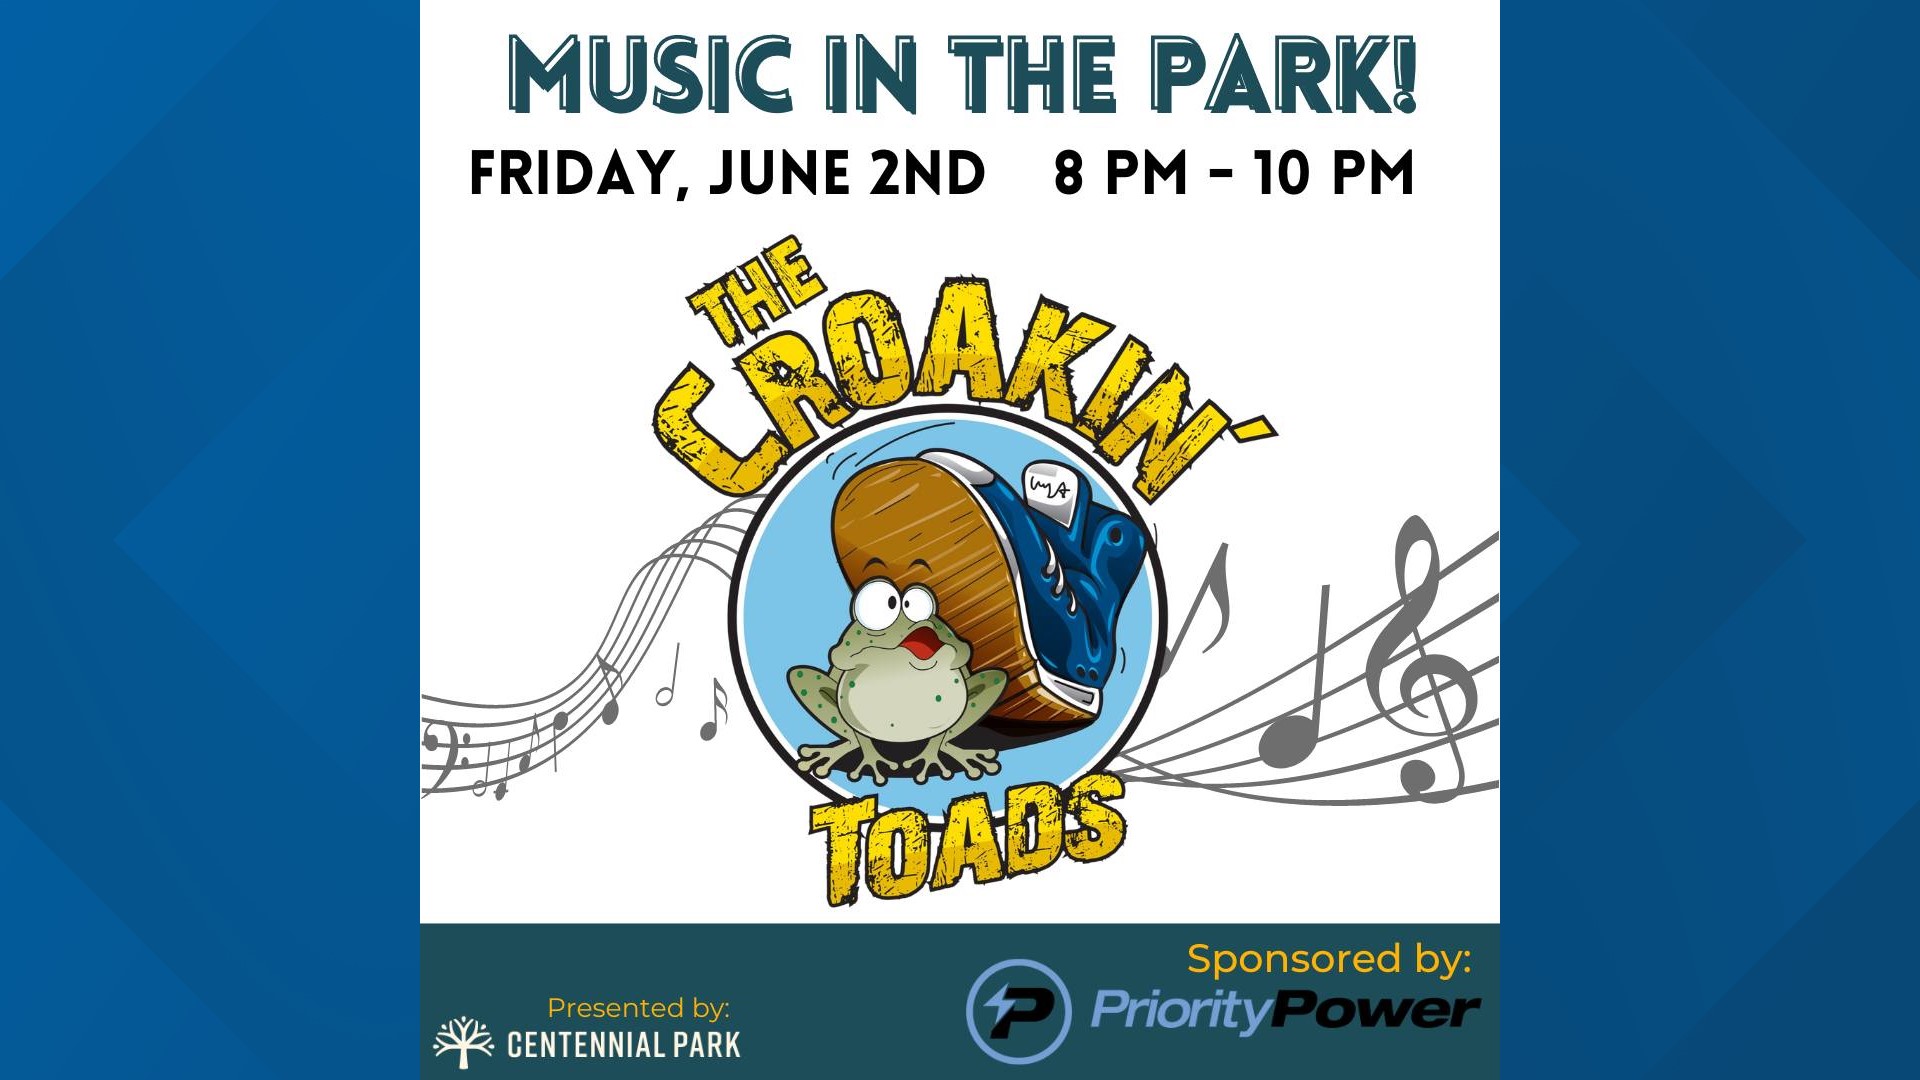 The Croakin' Toads will be performing covers from some of your favorite artists and bands from 8:00 p.m. to 10:00 p.m.